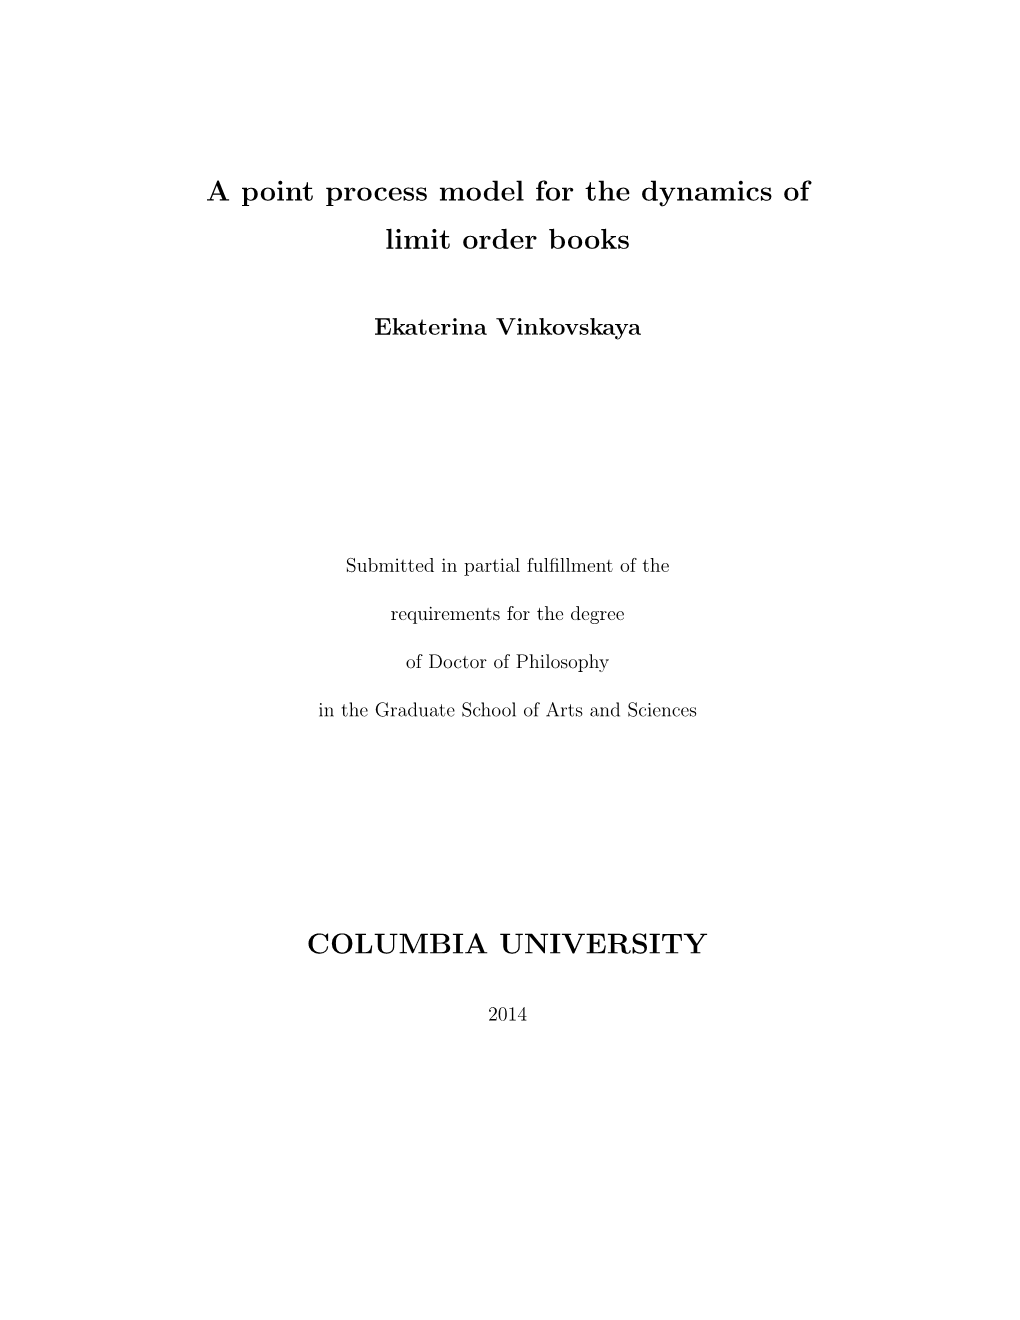 A Point Process Model for the Dynamics of Limit Order Books